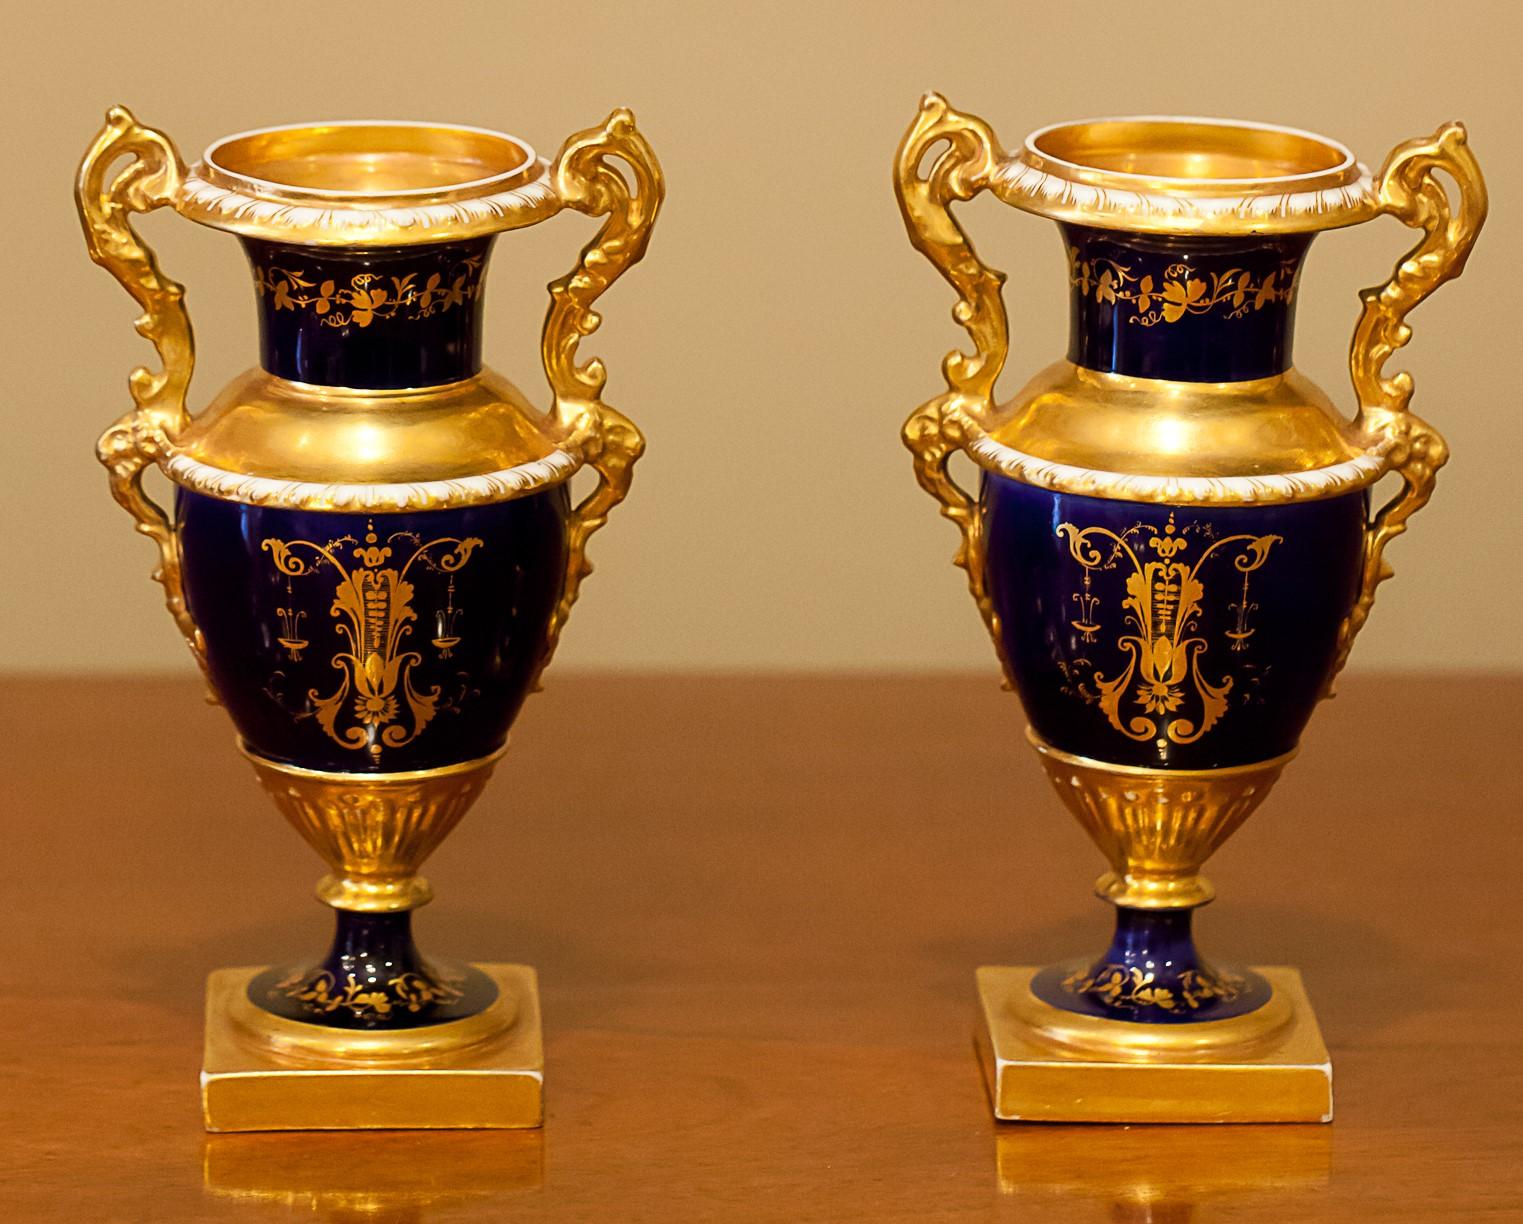 These beautiful Ovid form vases, while unmarked, appear to the work of the Derby factory possibly Barr, Flight and Barr. They have floral panels on one side and a gold leaf design on a cobalt ground on the other. They possibly were originally part